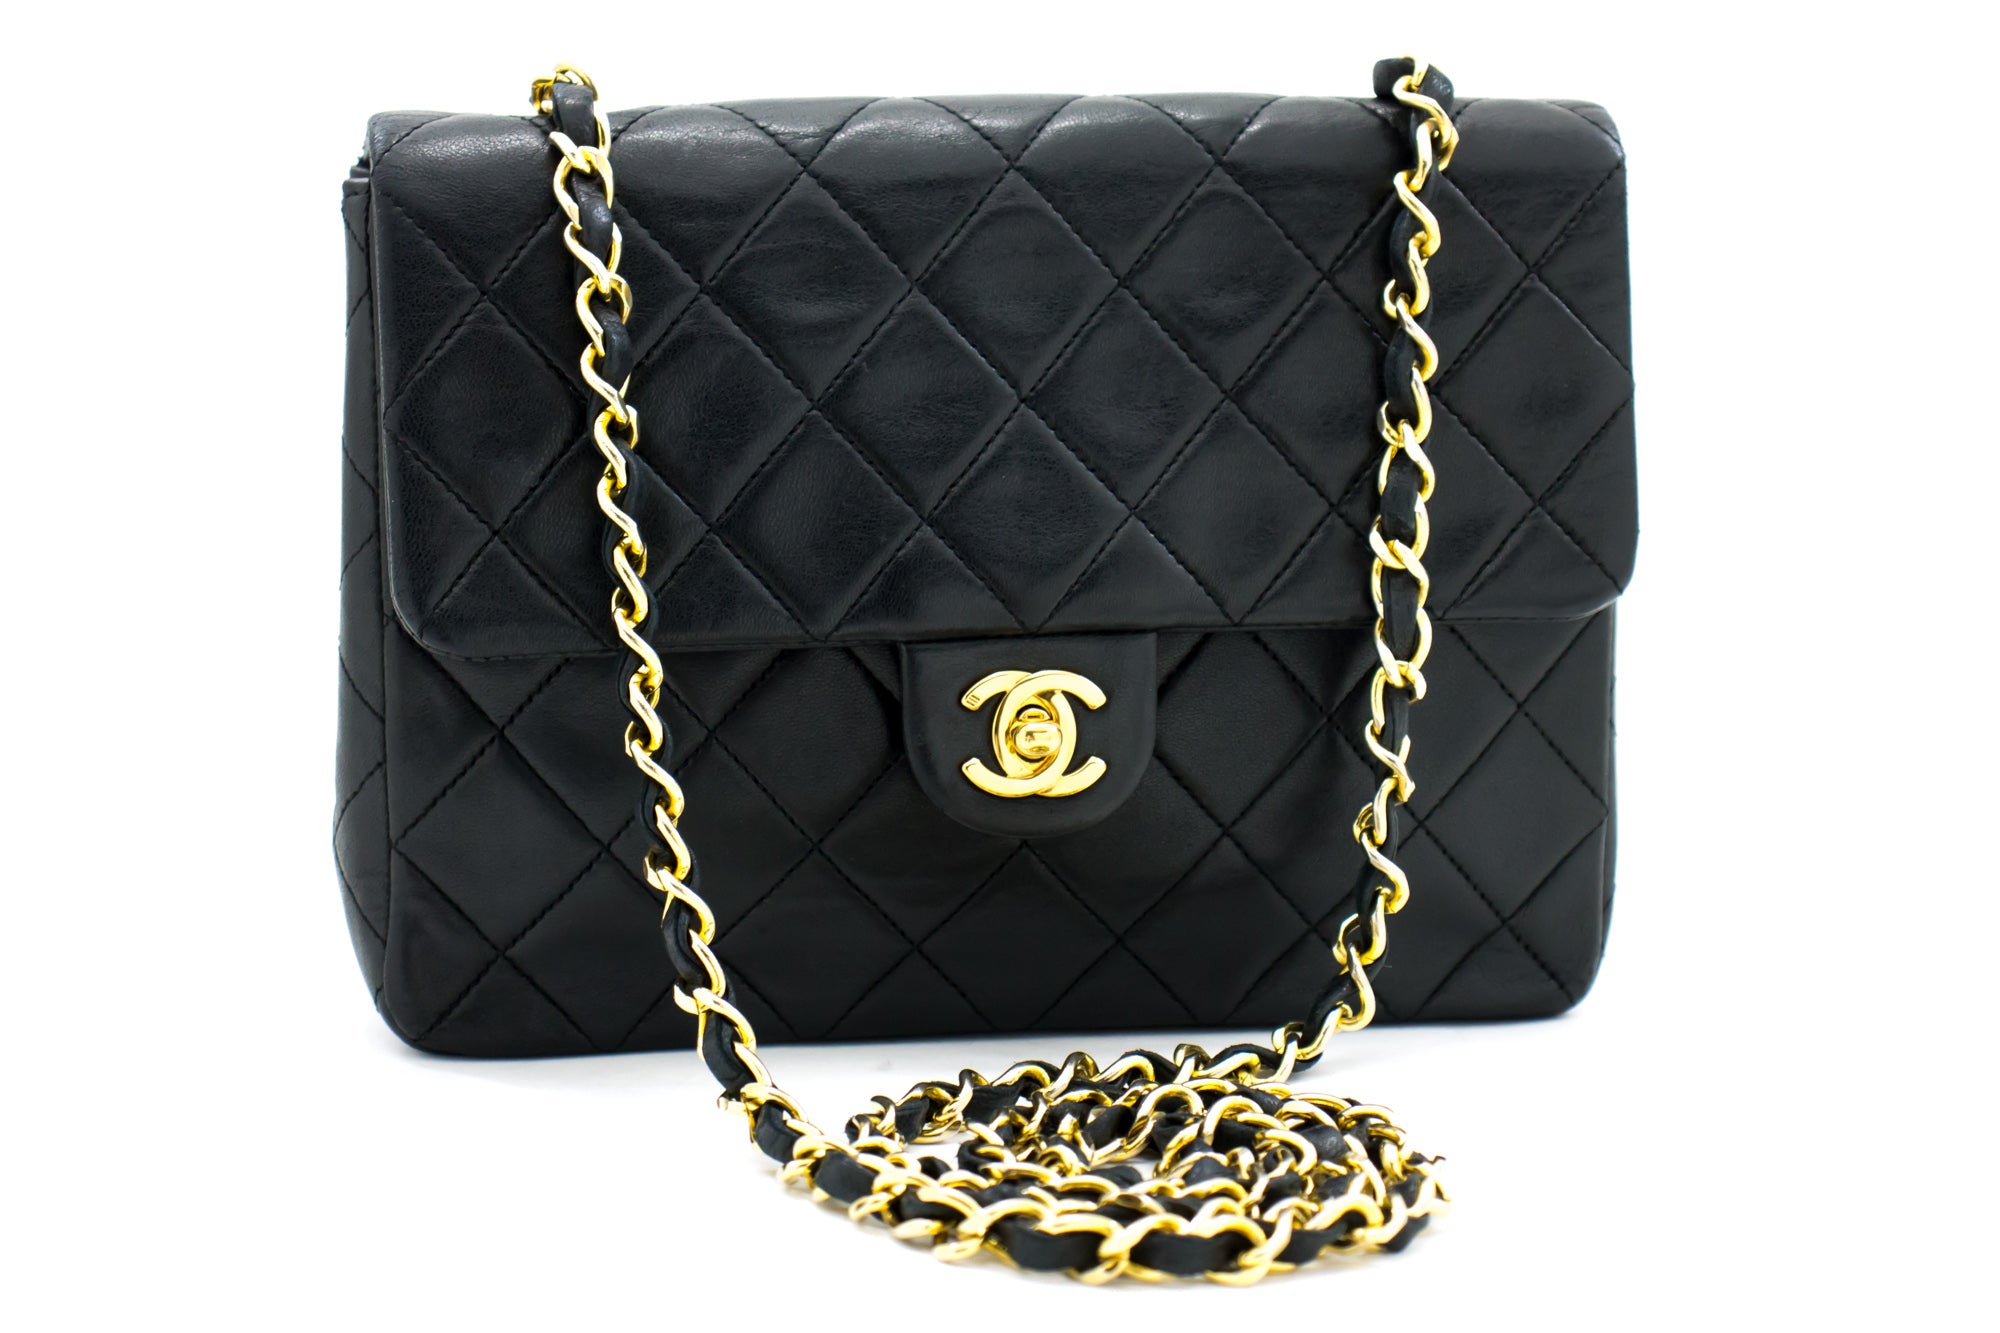 Handbags Chanel Chanel Classic Large 11 Chain Shoulder Bag Black Grained Calf Leather